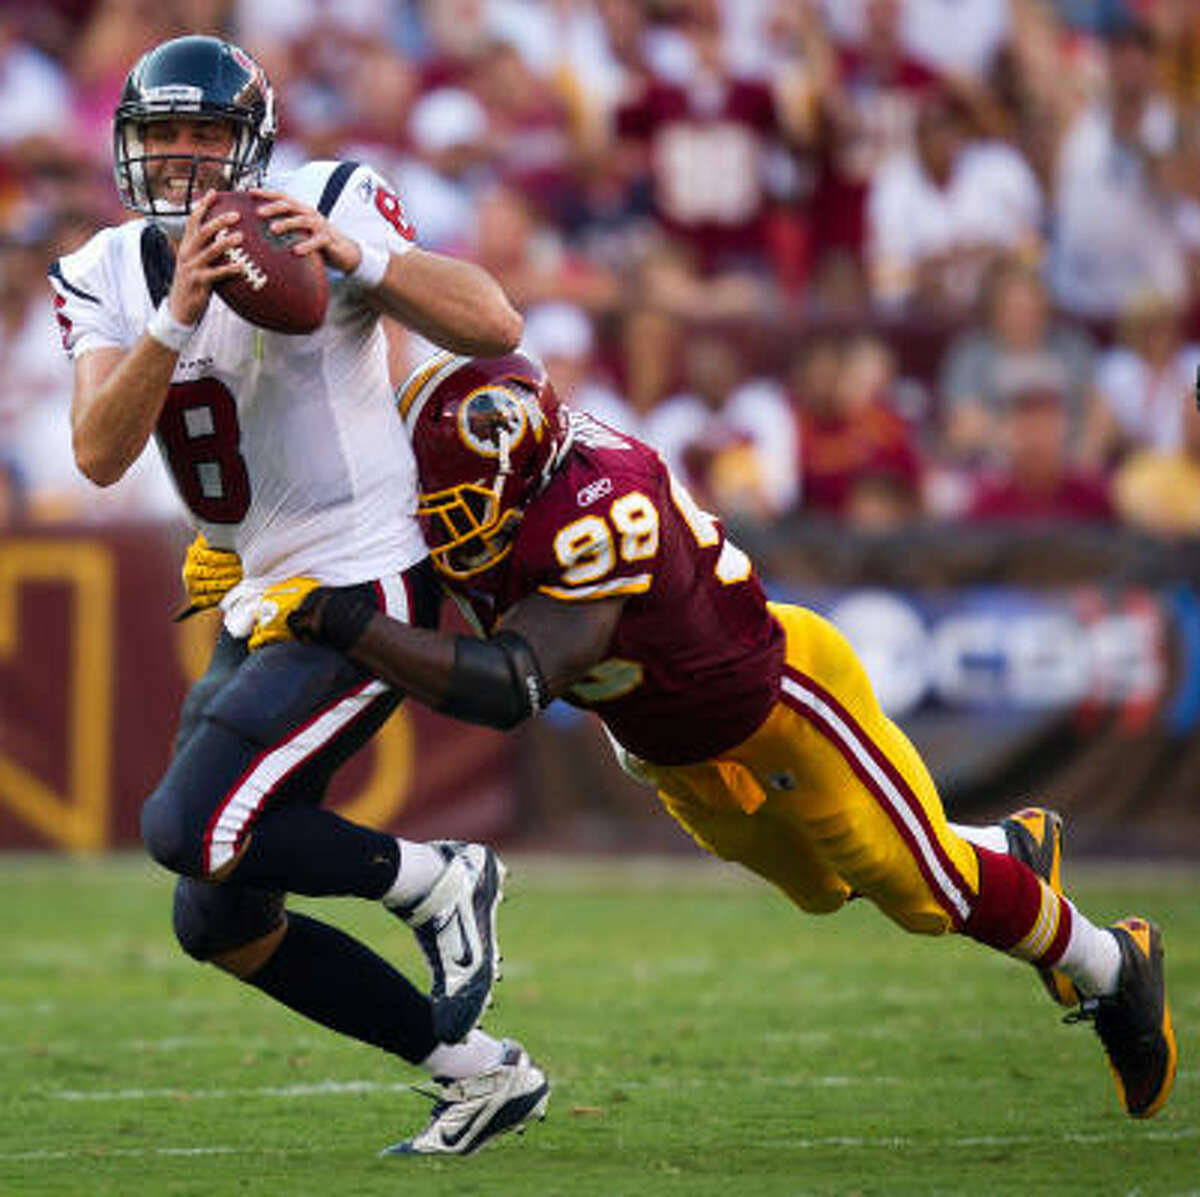 Texans quarterback Matt Schaub is sacked by Redskins linebacker Brian Orakpo in the second half. Schaub was sacked five times during the game.